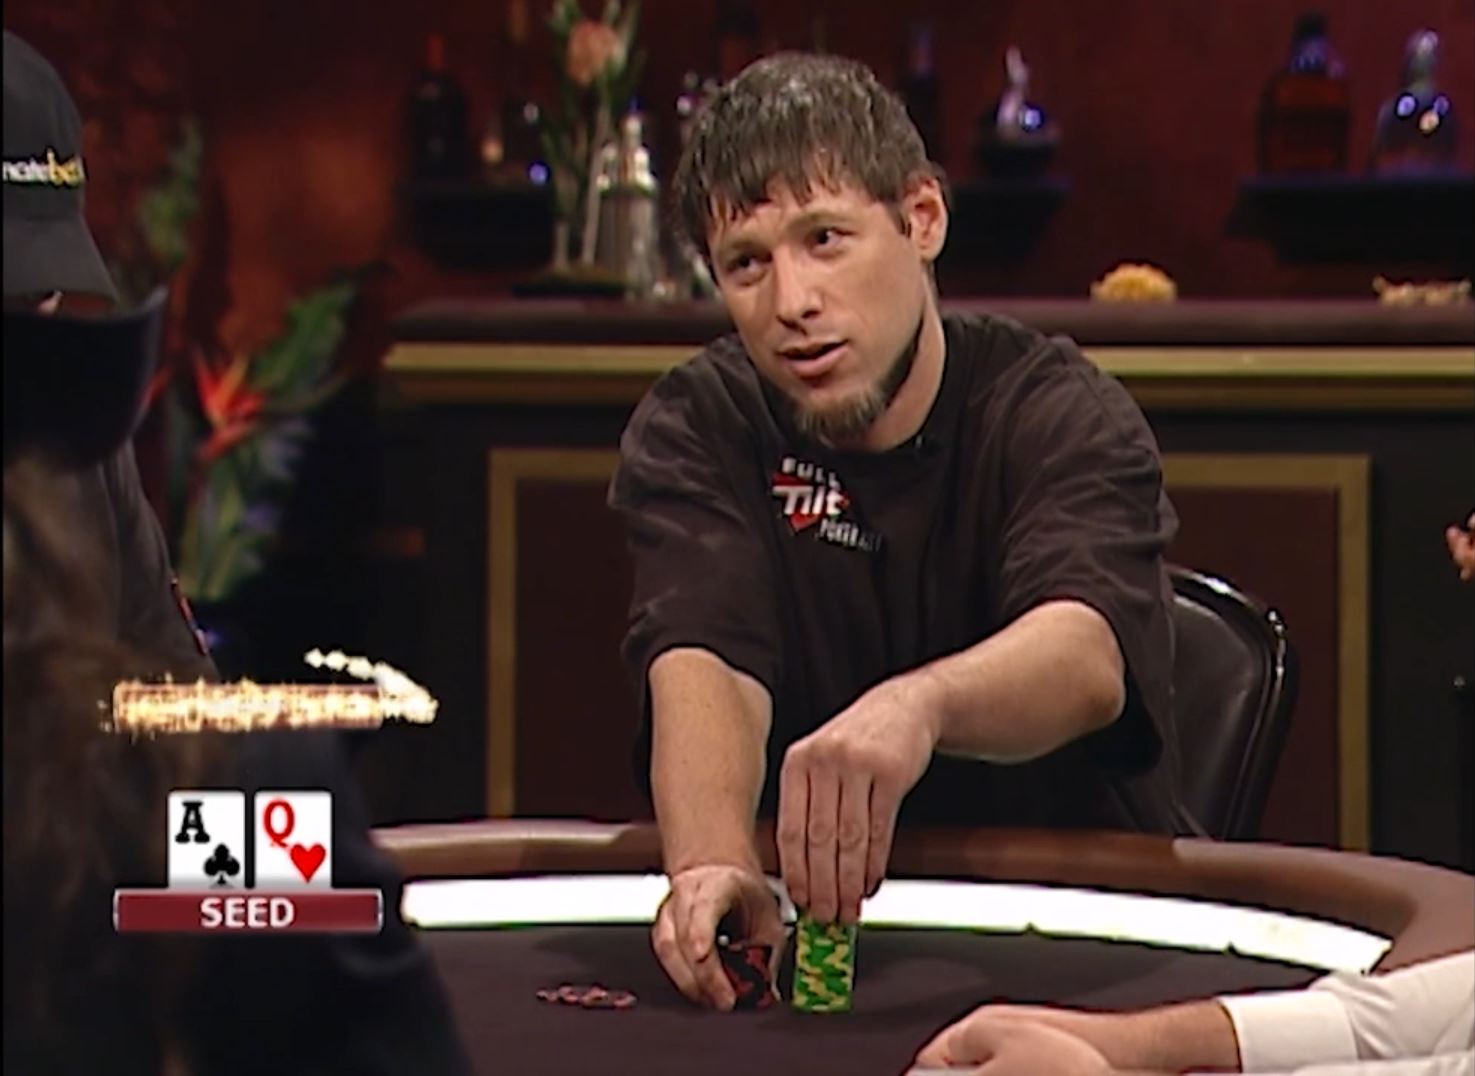 Former WSOP Champ Huck Seed Joins the Poker Hall of Fame